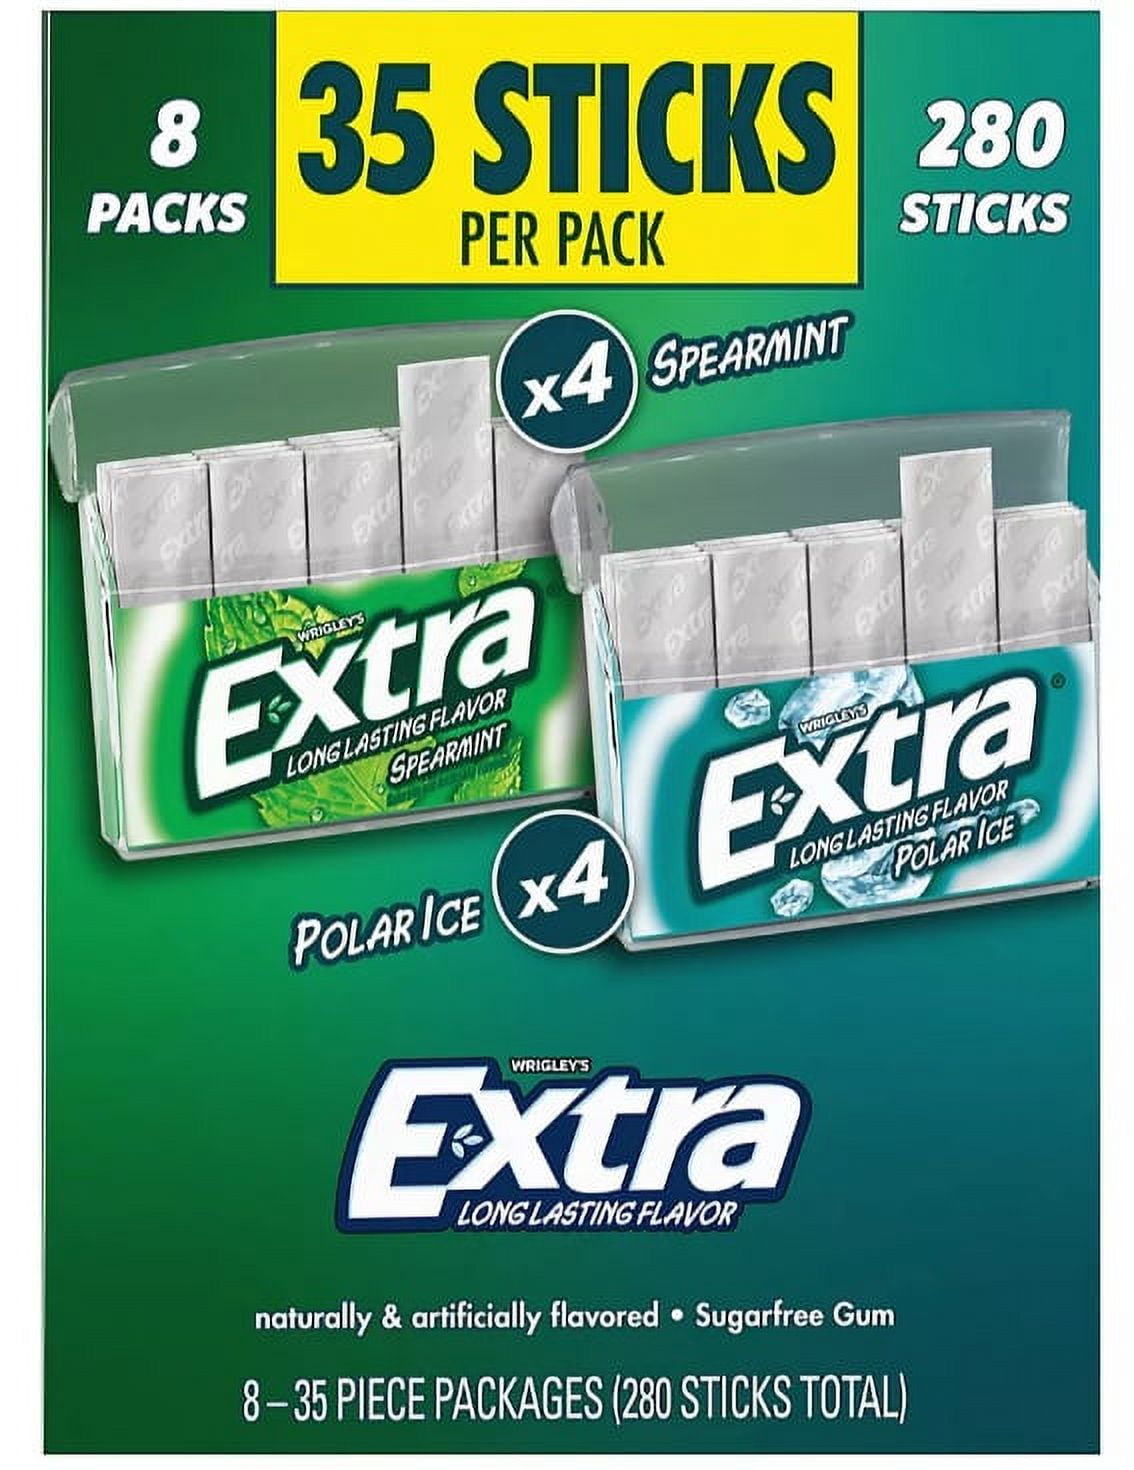 US chewing gum packs going pocket-sized, says analyst